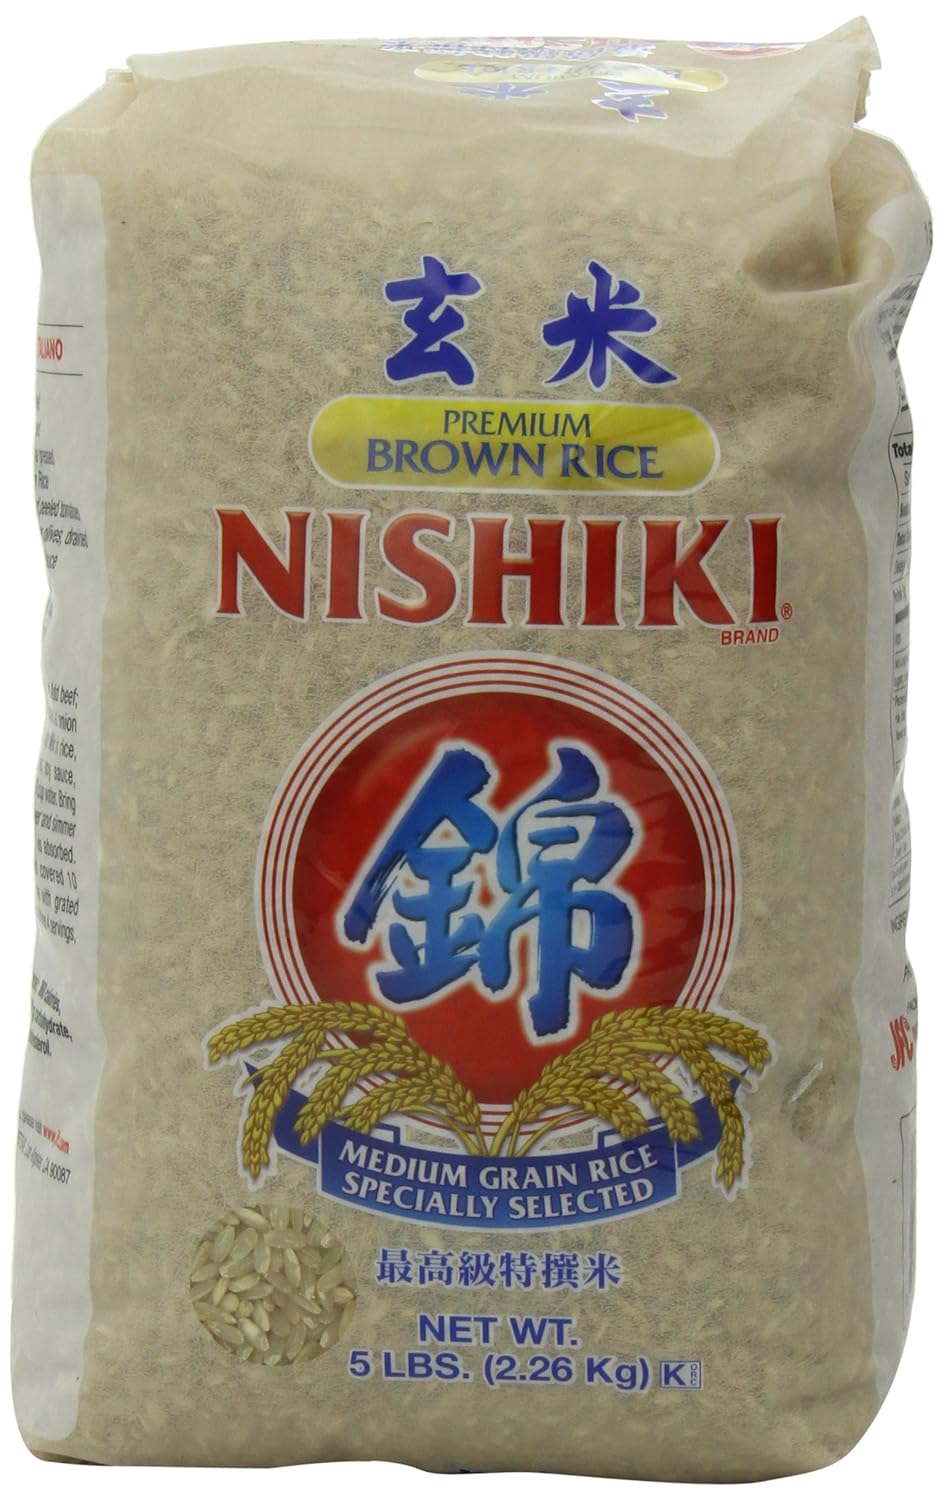 This brand of brown rice is truly delicious and is an excellent value for the amount that you get. It's a large package, and the grains are nice and small and uniform, and when used with a rice cooker the texture is just beautiful. I only ever use this rice and I completely omitted white rice from my diet and this has been a godsend. Honestly if you buy brown rice at the store you need to try this first because it's actually less money and it tastes amazing. Give yourself a break and give it a t